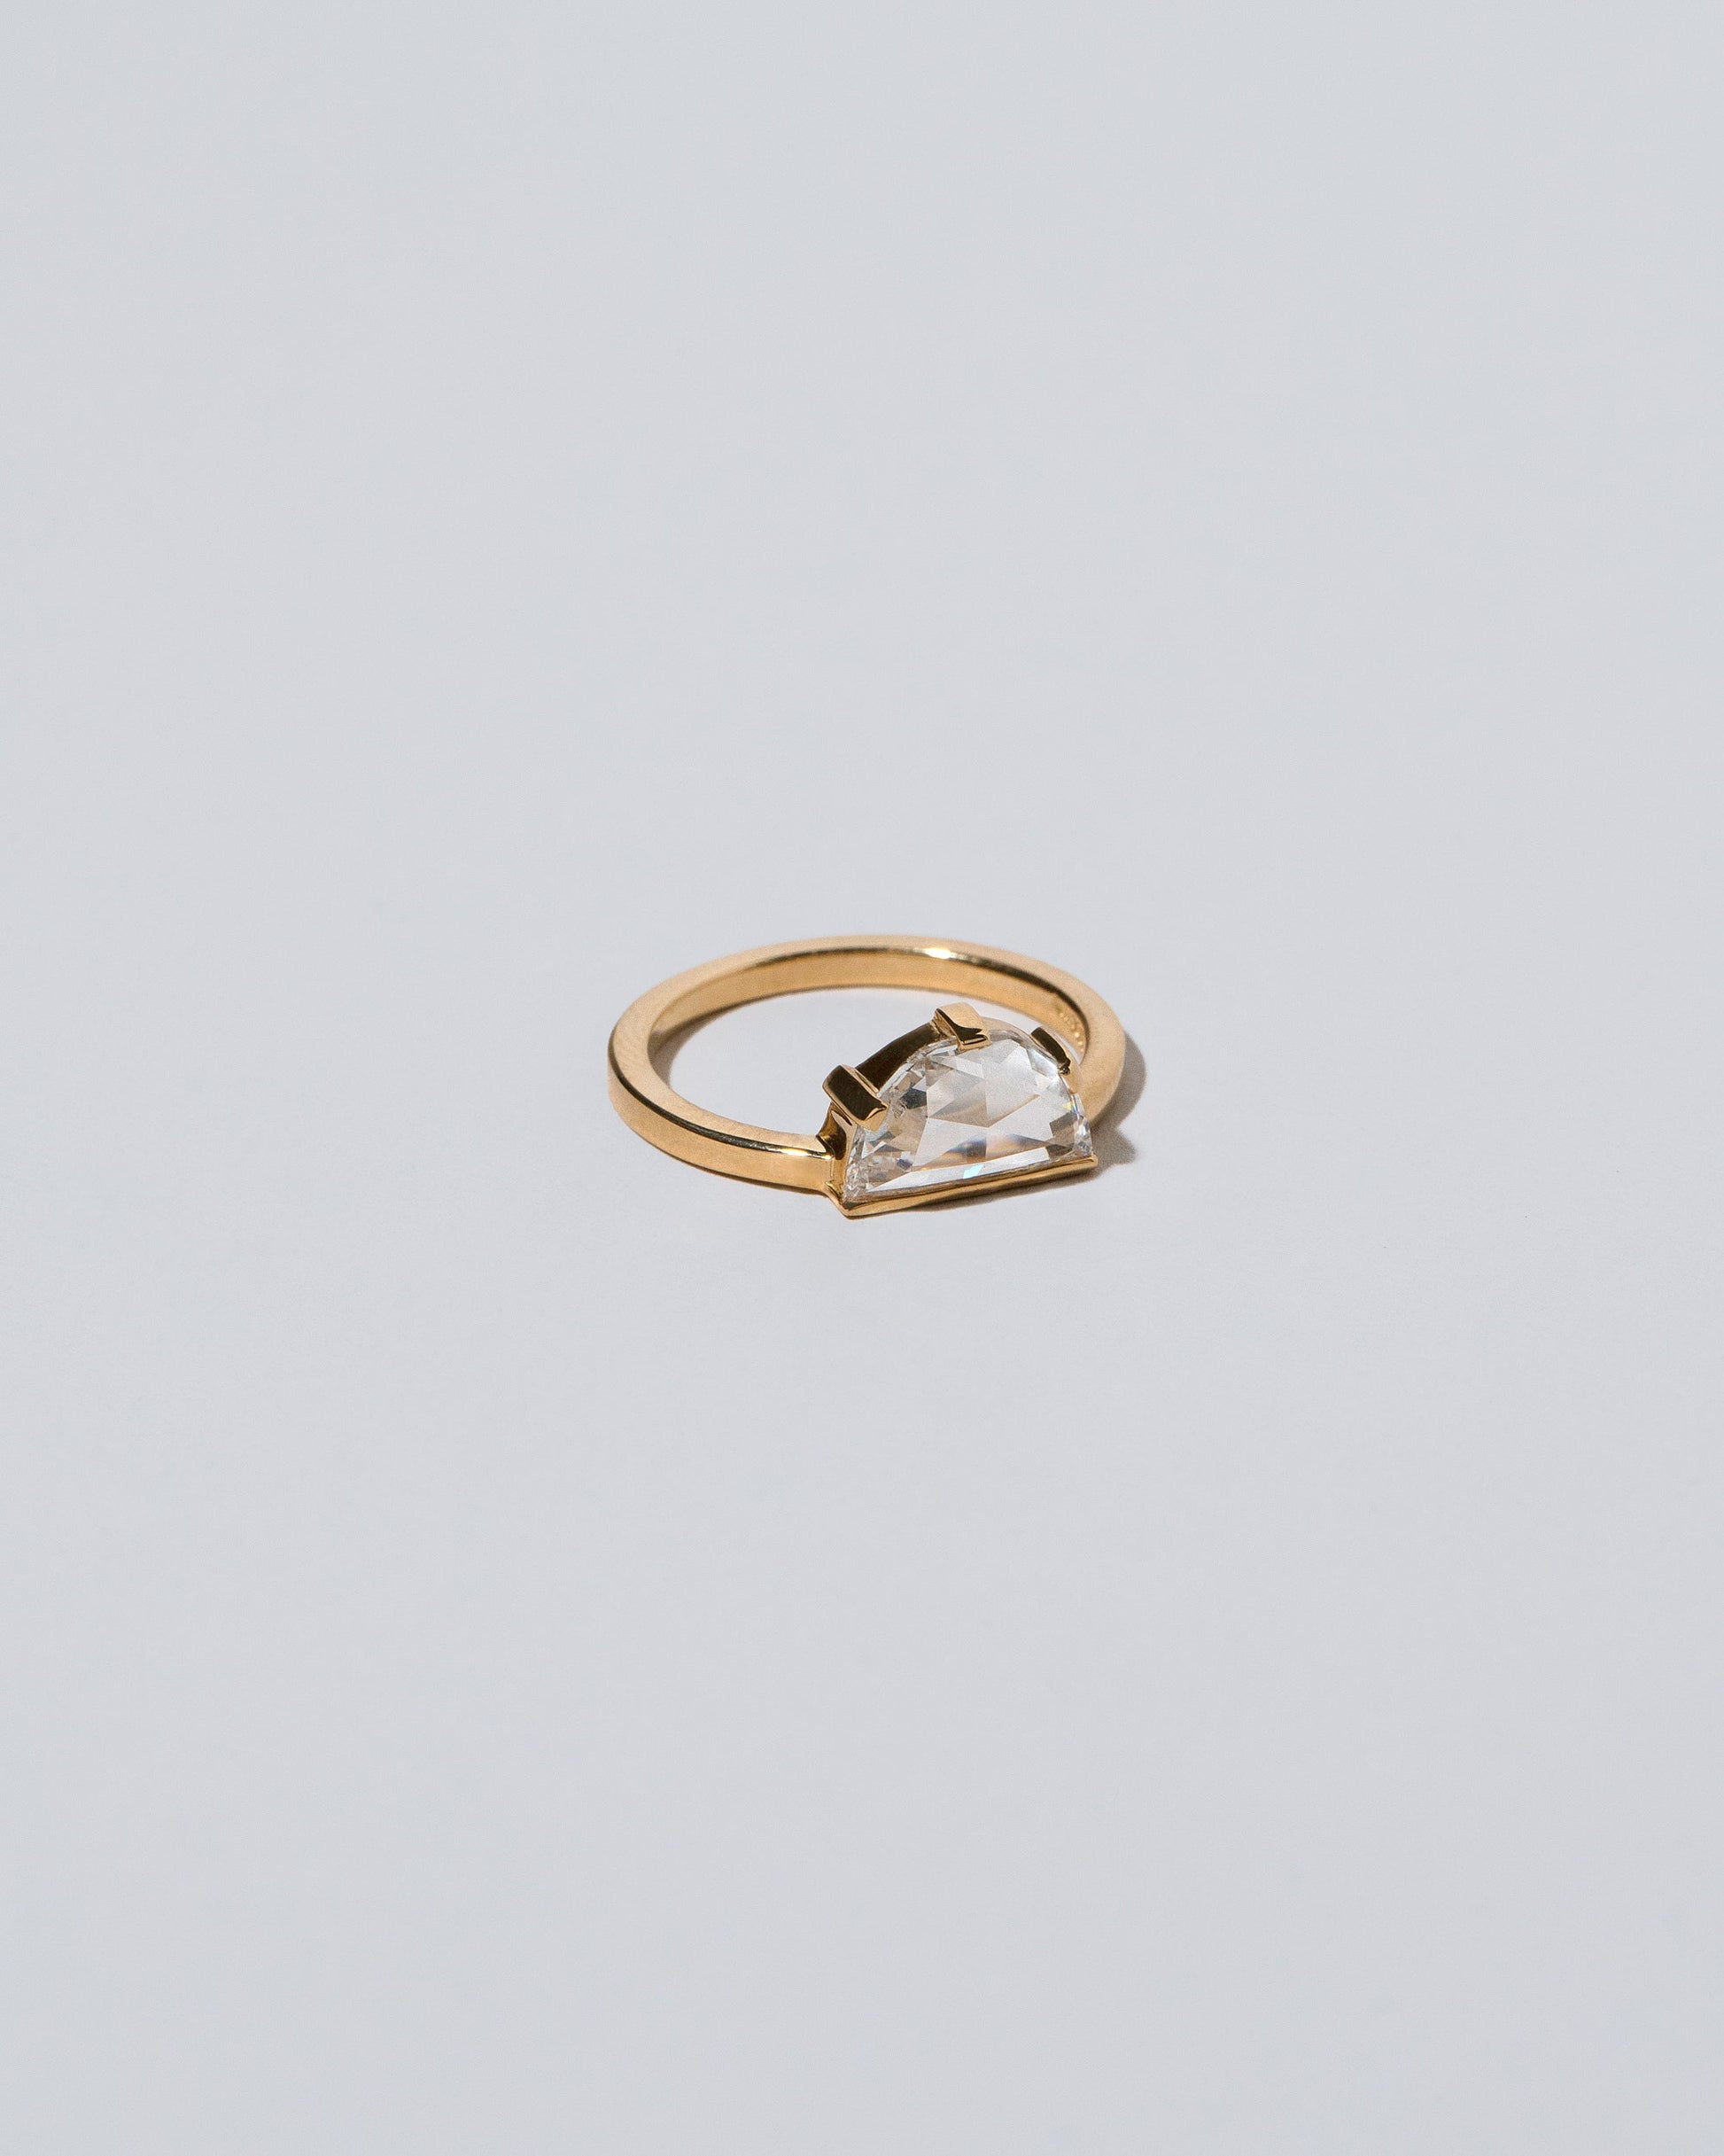 Product photo of the Plié Ring on light color background